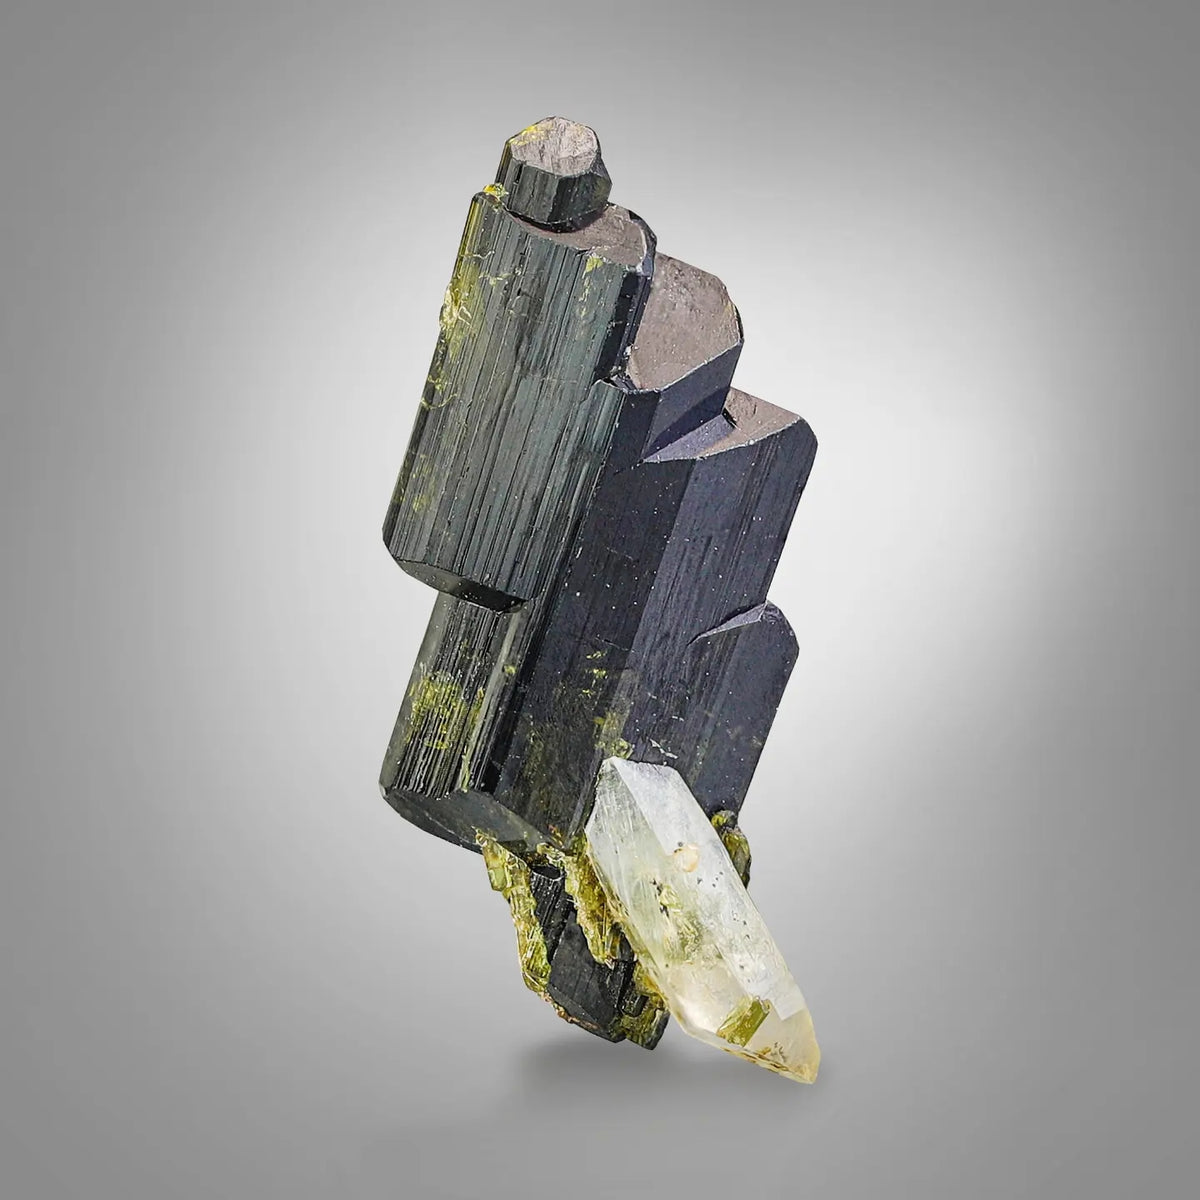 Discover the Unique Beauty of Epidote with Quartz Crystal Specimen from Pakistan